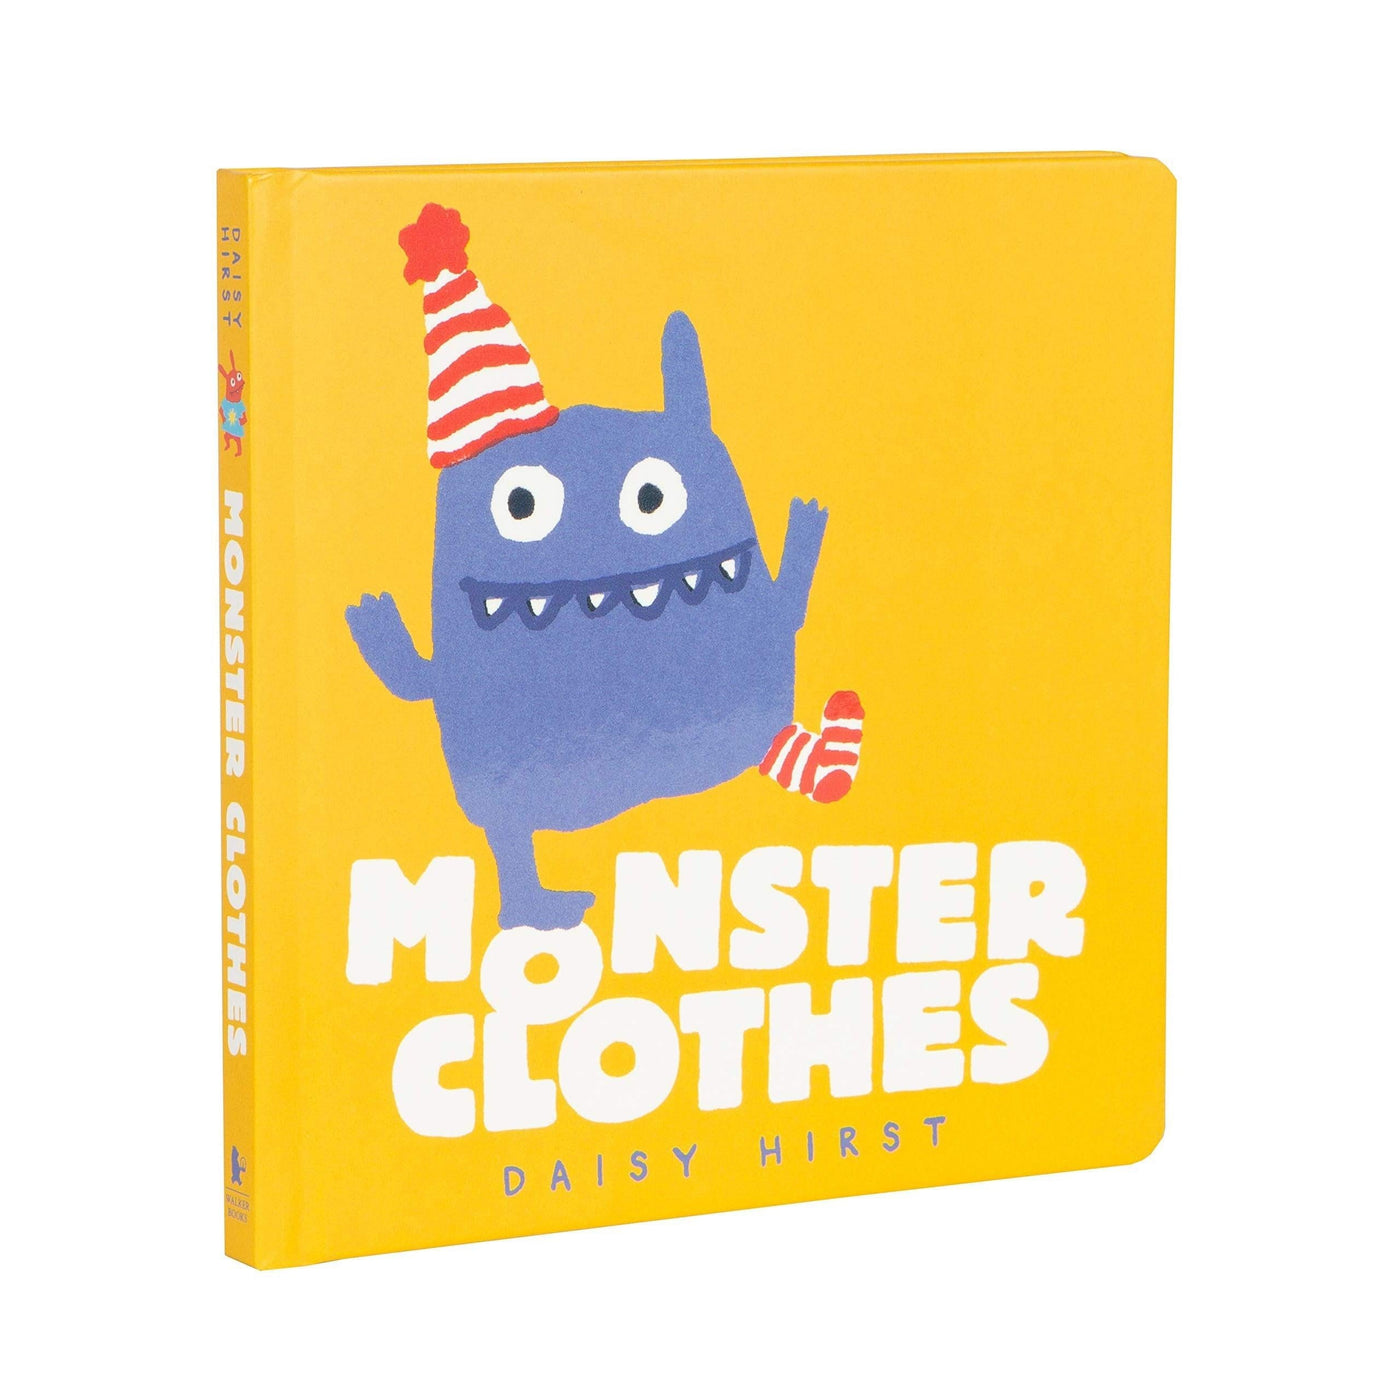 Monster Clothes - Daisy Hirst